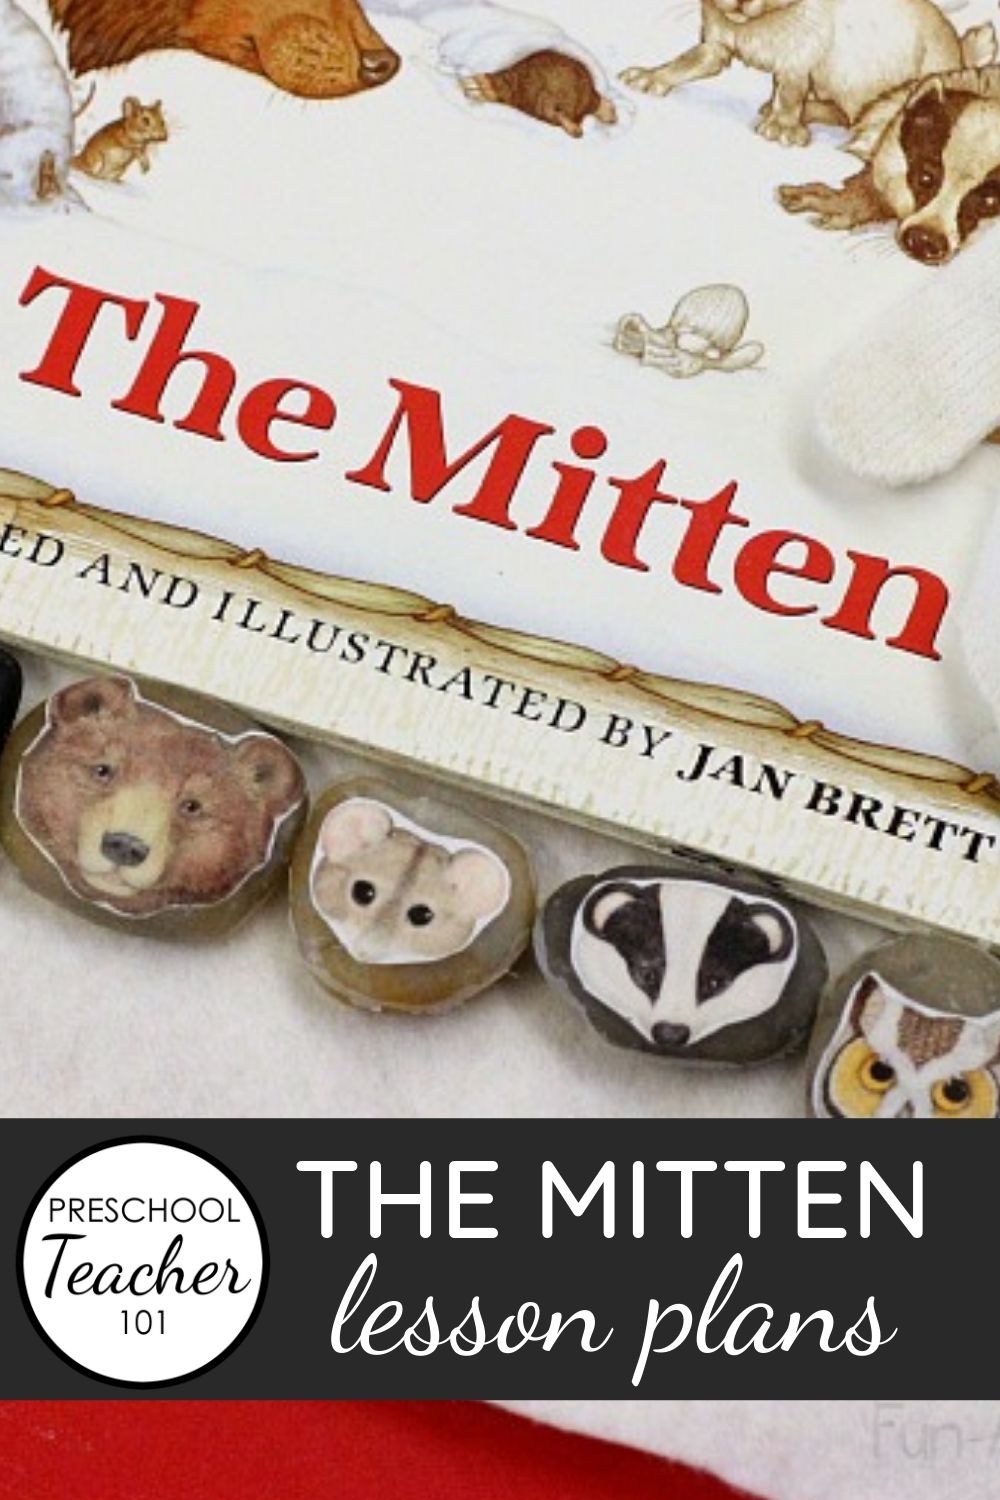 Lessons Plans -The Mitten Theme